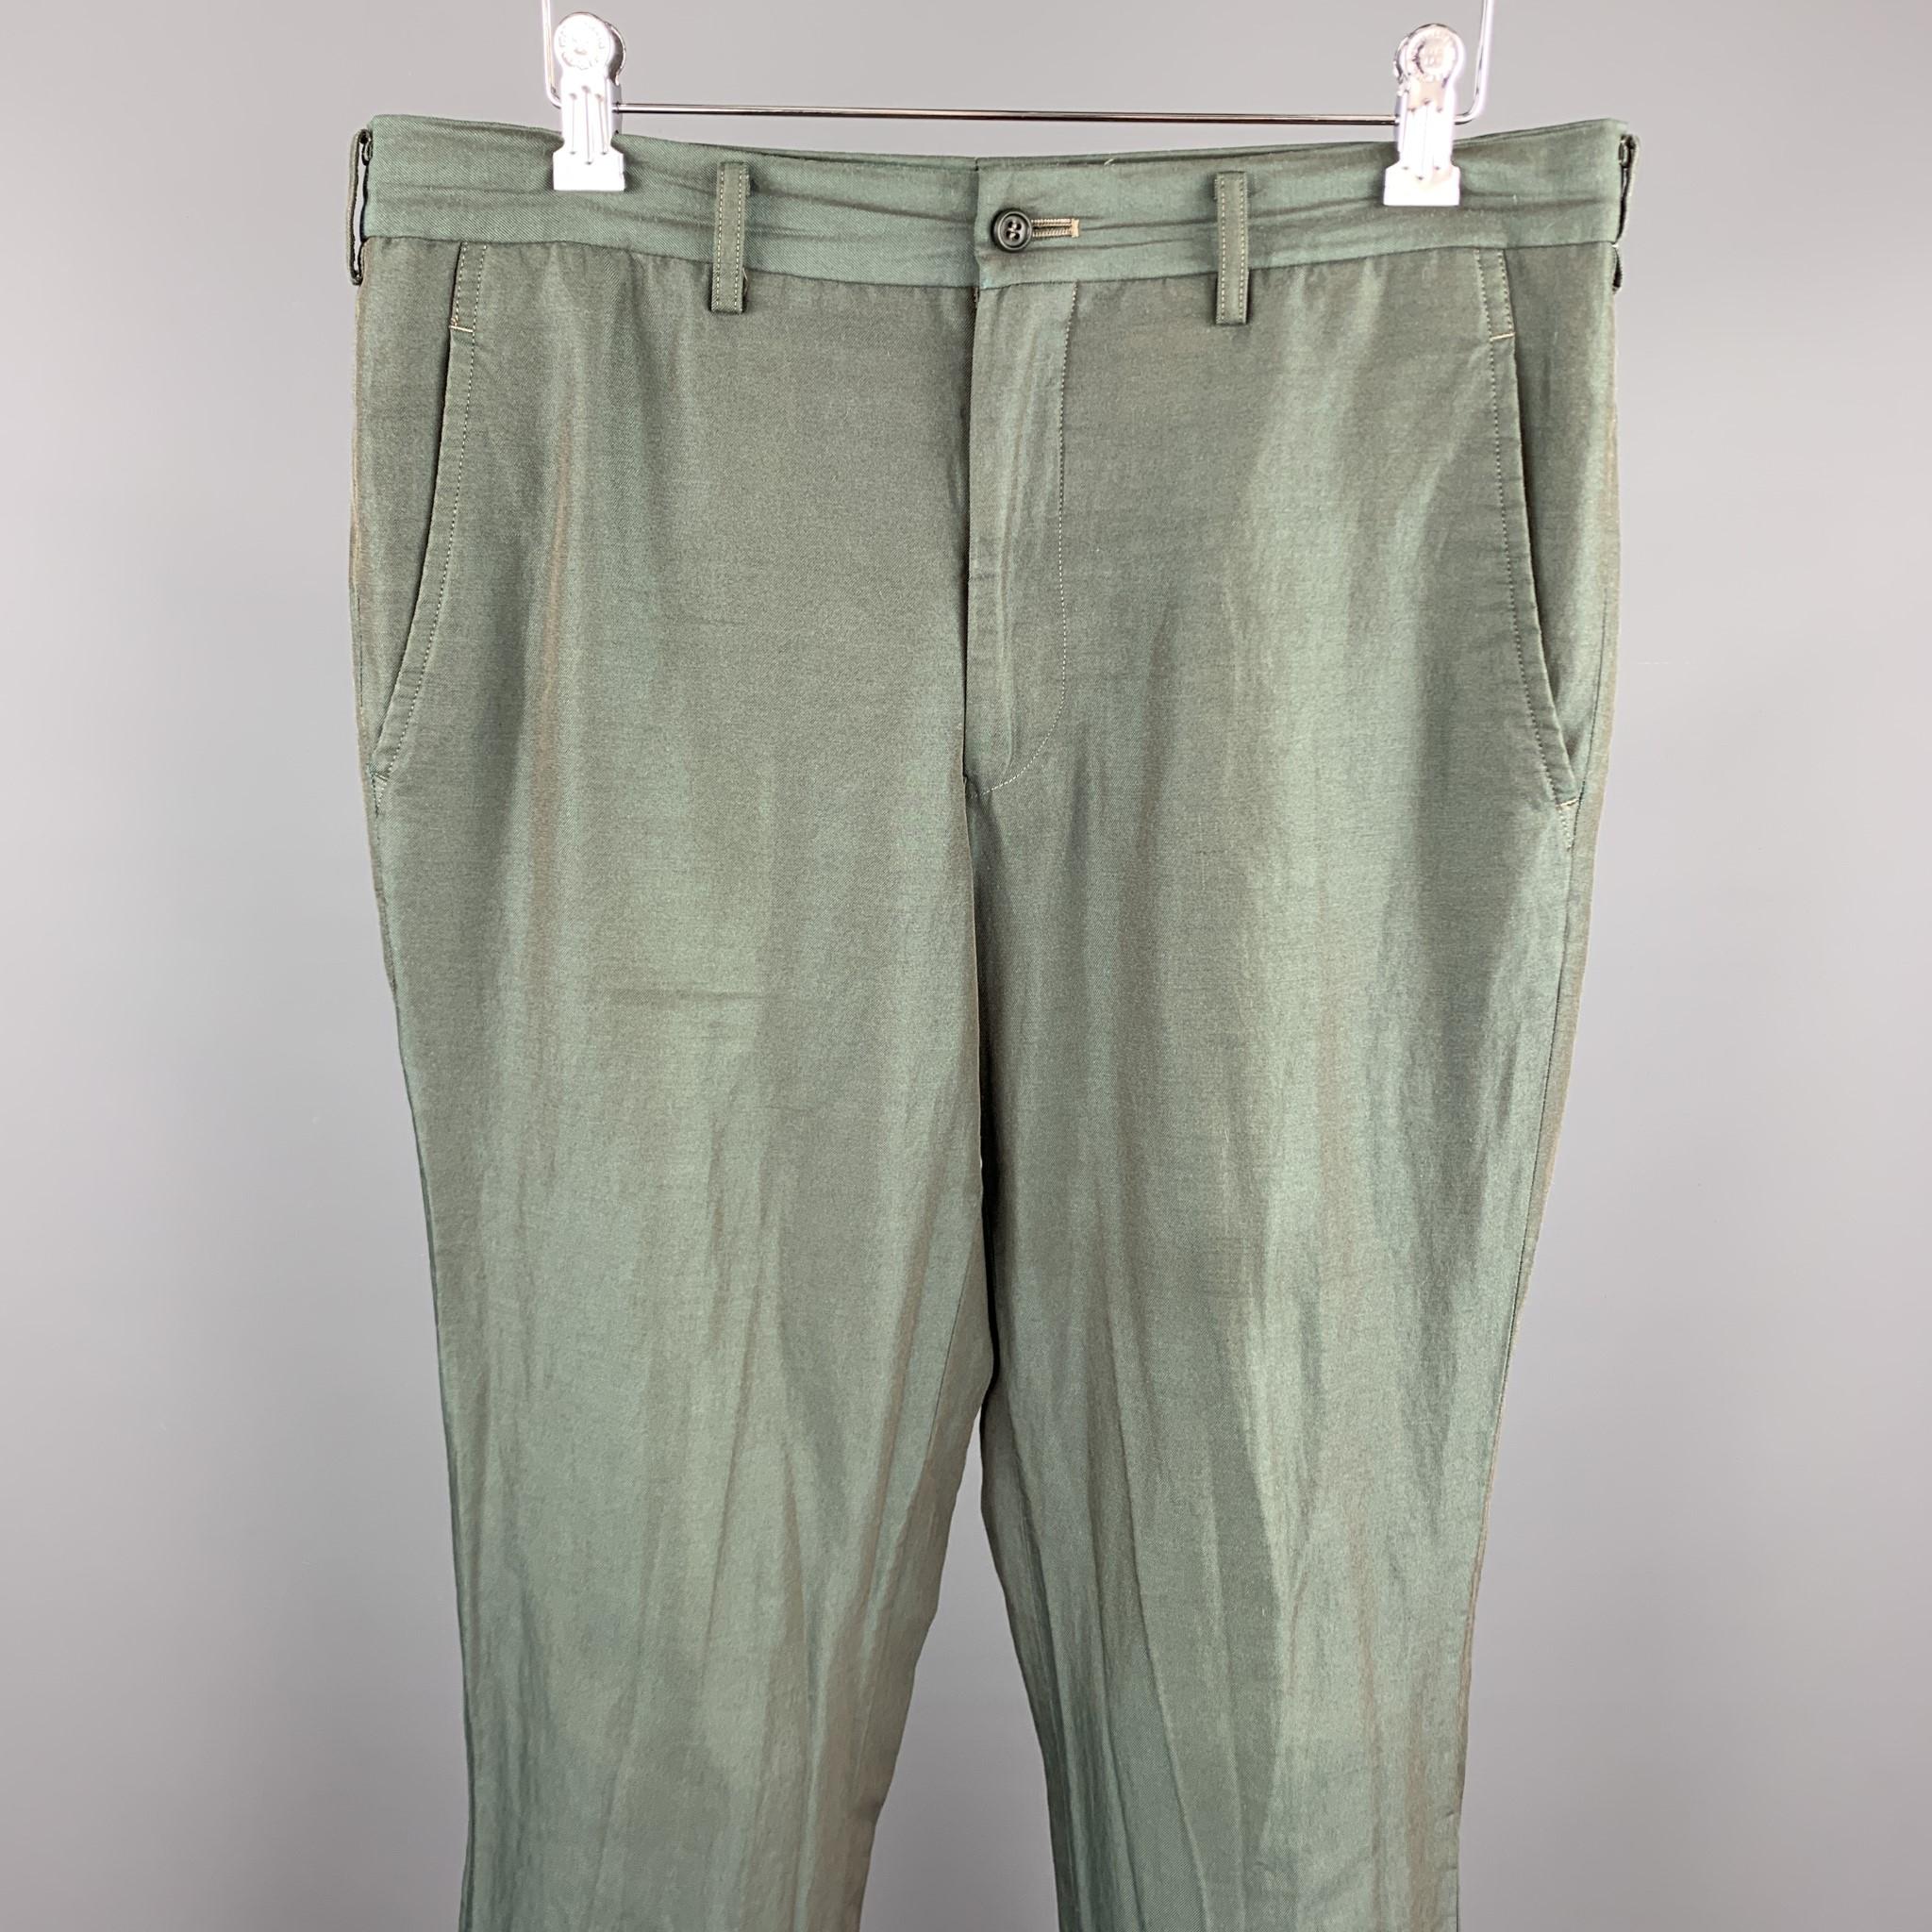 COMME des GARCONS HOMME PLUS casual pants comes in a green two toned iridescent featuring a flat front, cuffed legs, and a zip fly closure. Made in Japan. 

Good Pre-Owned Condition.
Marked: M AD2014

Measurements:

Waist: 32 in. 
Rise: 9 in.